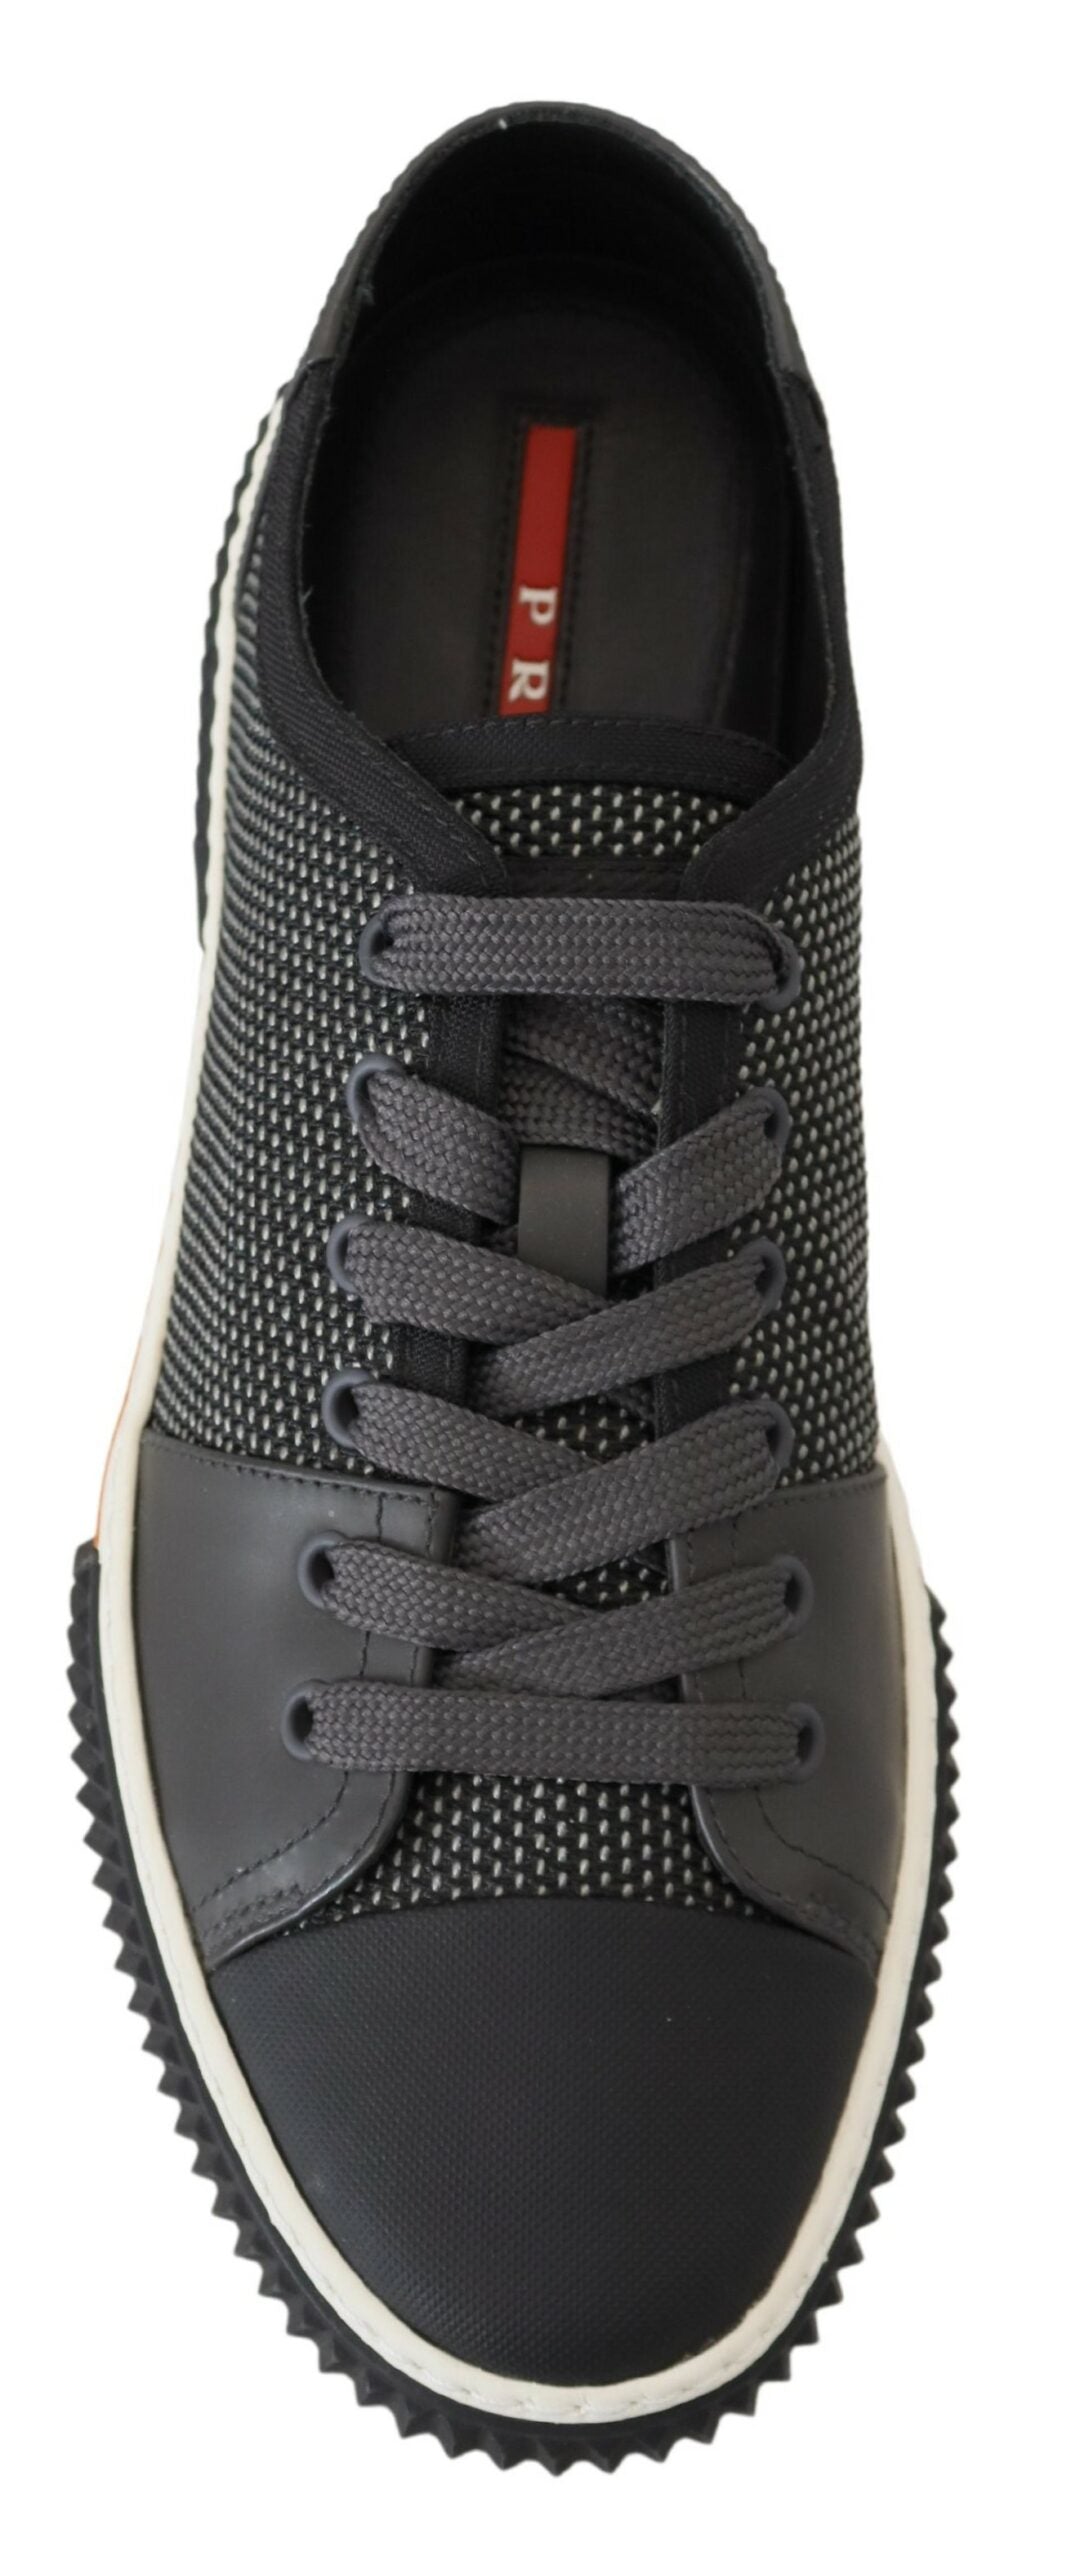 Prada Elevate Your Style with Sleek Gray Low-Top Sneakers